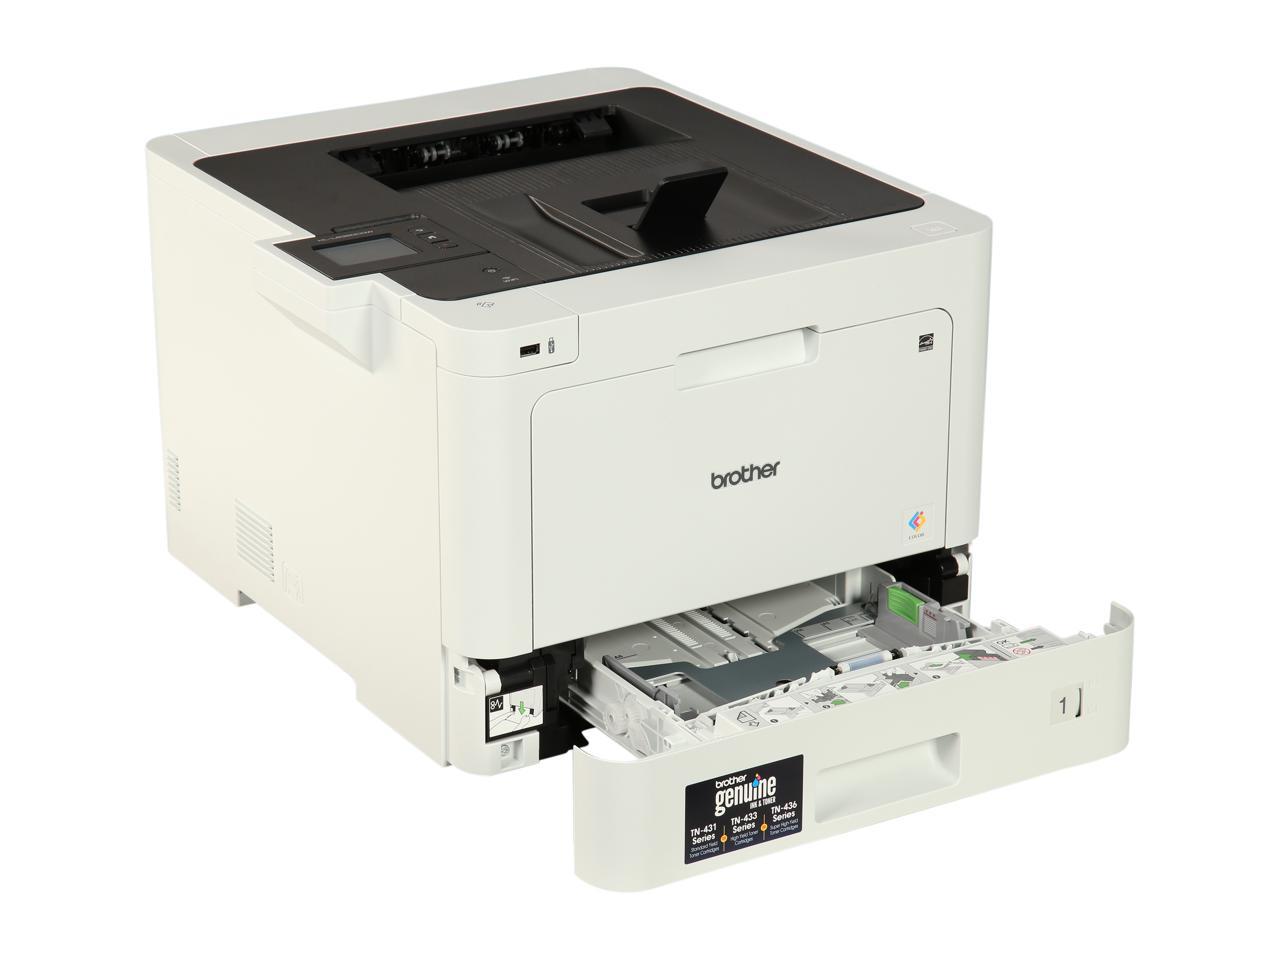 Brother Hl L8360cdw Business Wireless Color Laser Printer With Automatic Duplex Printing Mobile 3814